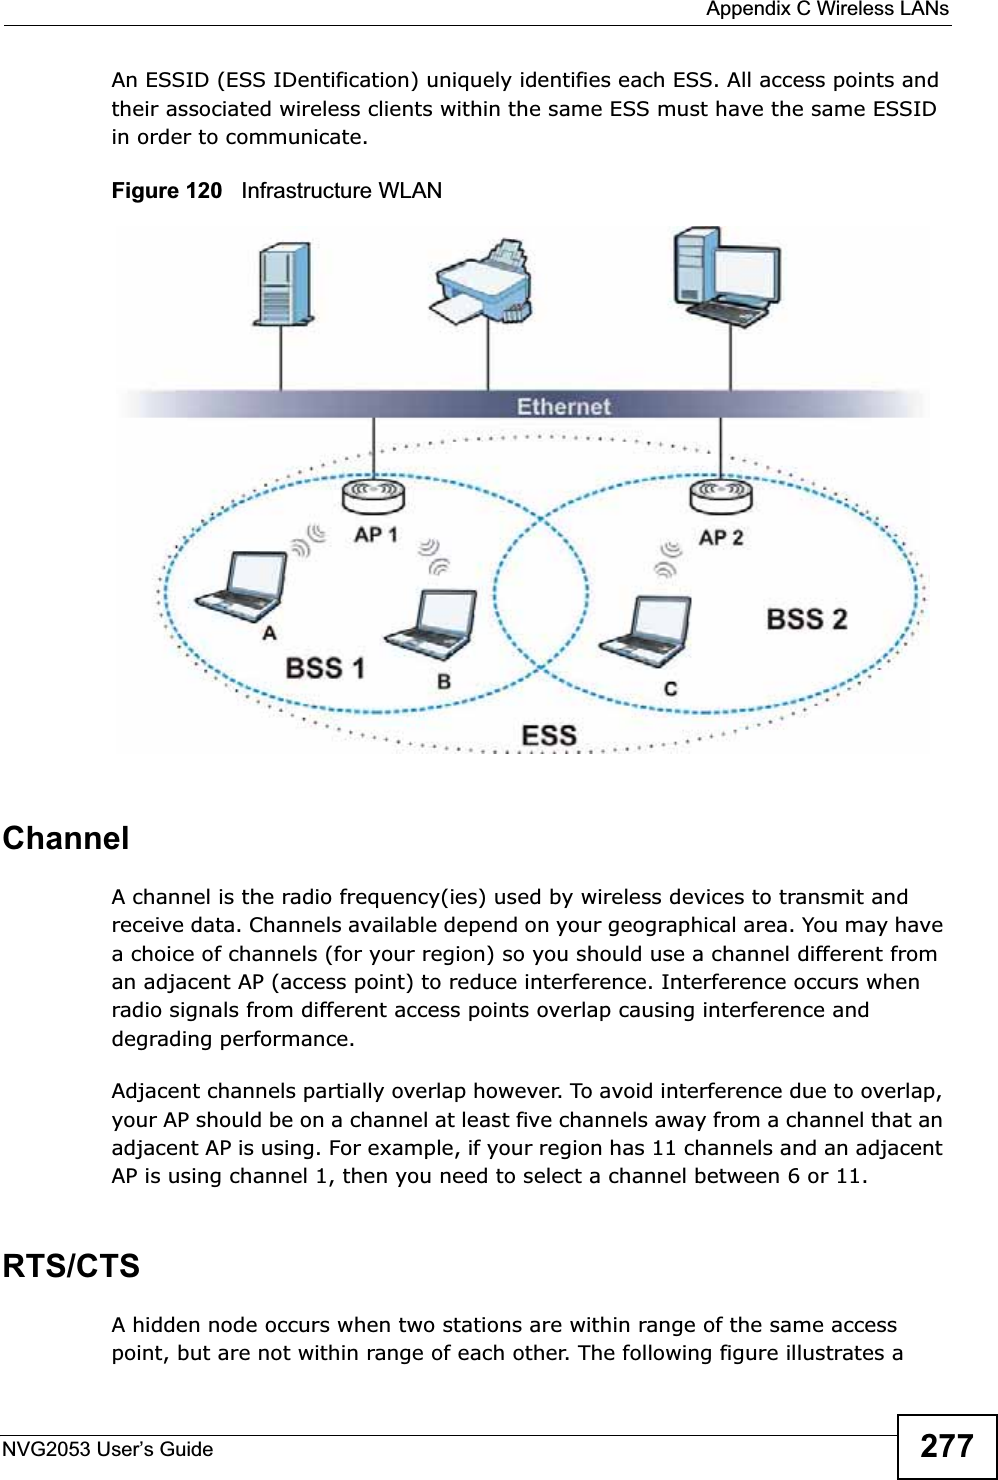  Appendix C Wireless LANsNVG2053 User’s Guide 277An ESSID (ESS IDentification) uniquely identifies each ESS. All access points and their associated wireless clients within the same ESS must have the same ESSID in order to communicate.Figure 120   Infrastructure WLANChannelA channel is the radio frequency(ies) used by wireless devices to transmit and receive data. Channels available depend on your geographical area. You may have a choice of channels (for your region) so you should use a channel different from an adjacent AP (access point) to reduce interference. Interference occurs when radio signals from different access points overlap causing interference and degrading performance.Adjacent channels partially overlap however. To avoid interference due to overlap, your AP should be on a channel at least five channels away from a channel that an adjacent AP is using. For example, if your region has 11 channels and an adjacent AP is using channel 1, then you need to select a channel between 6 or 11.RTS/CTSA hidden node occurs when two stations are within range of the same access point, but are not within range of each other. The following figure illustrates a 